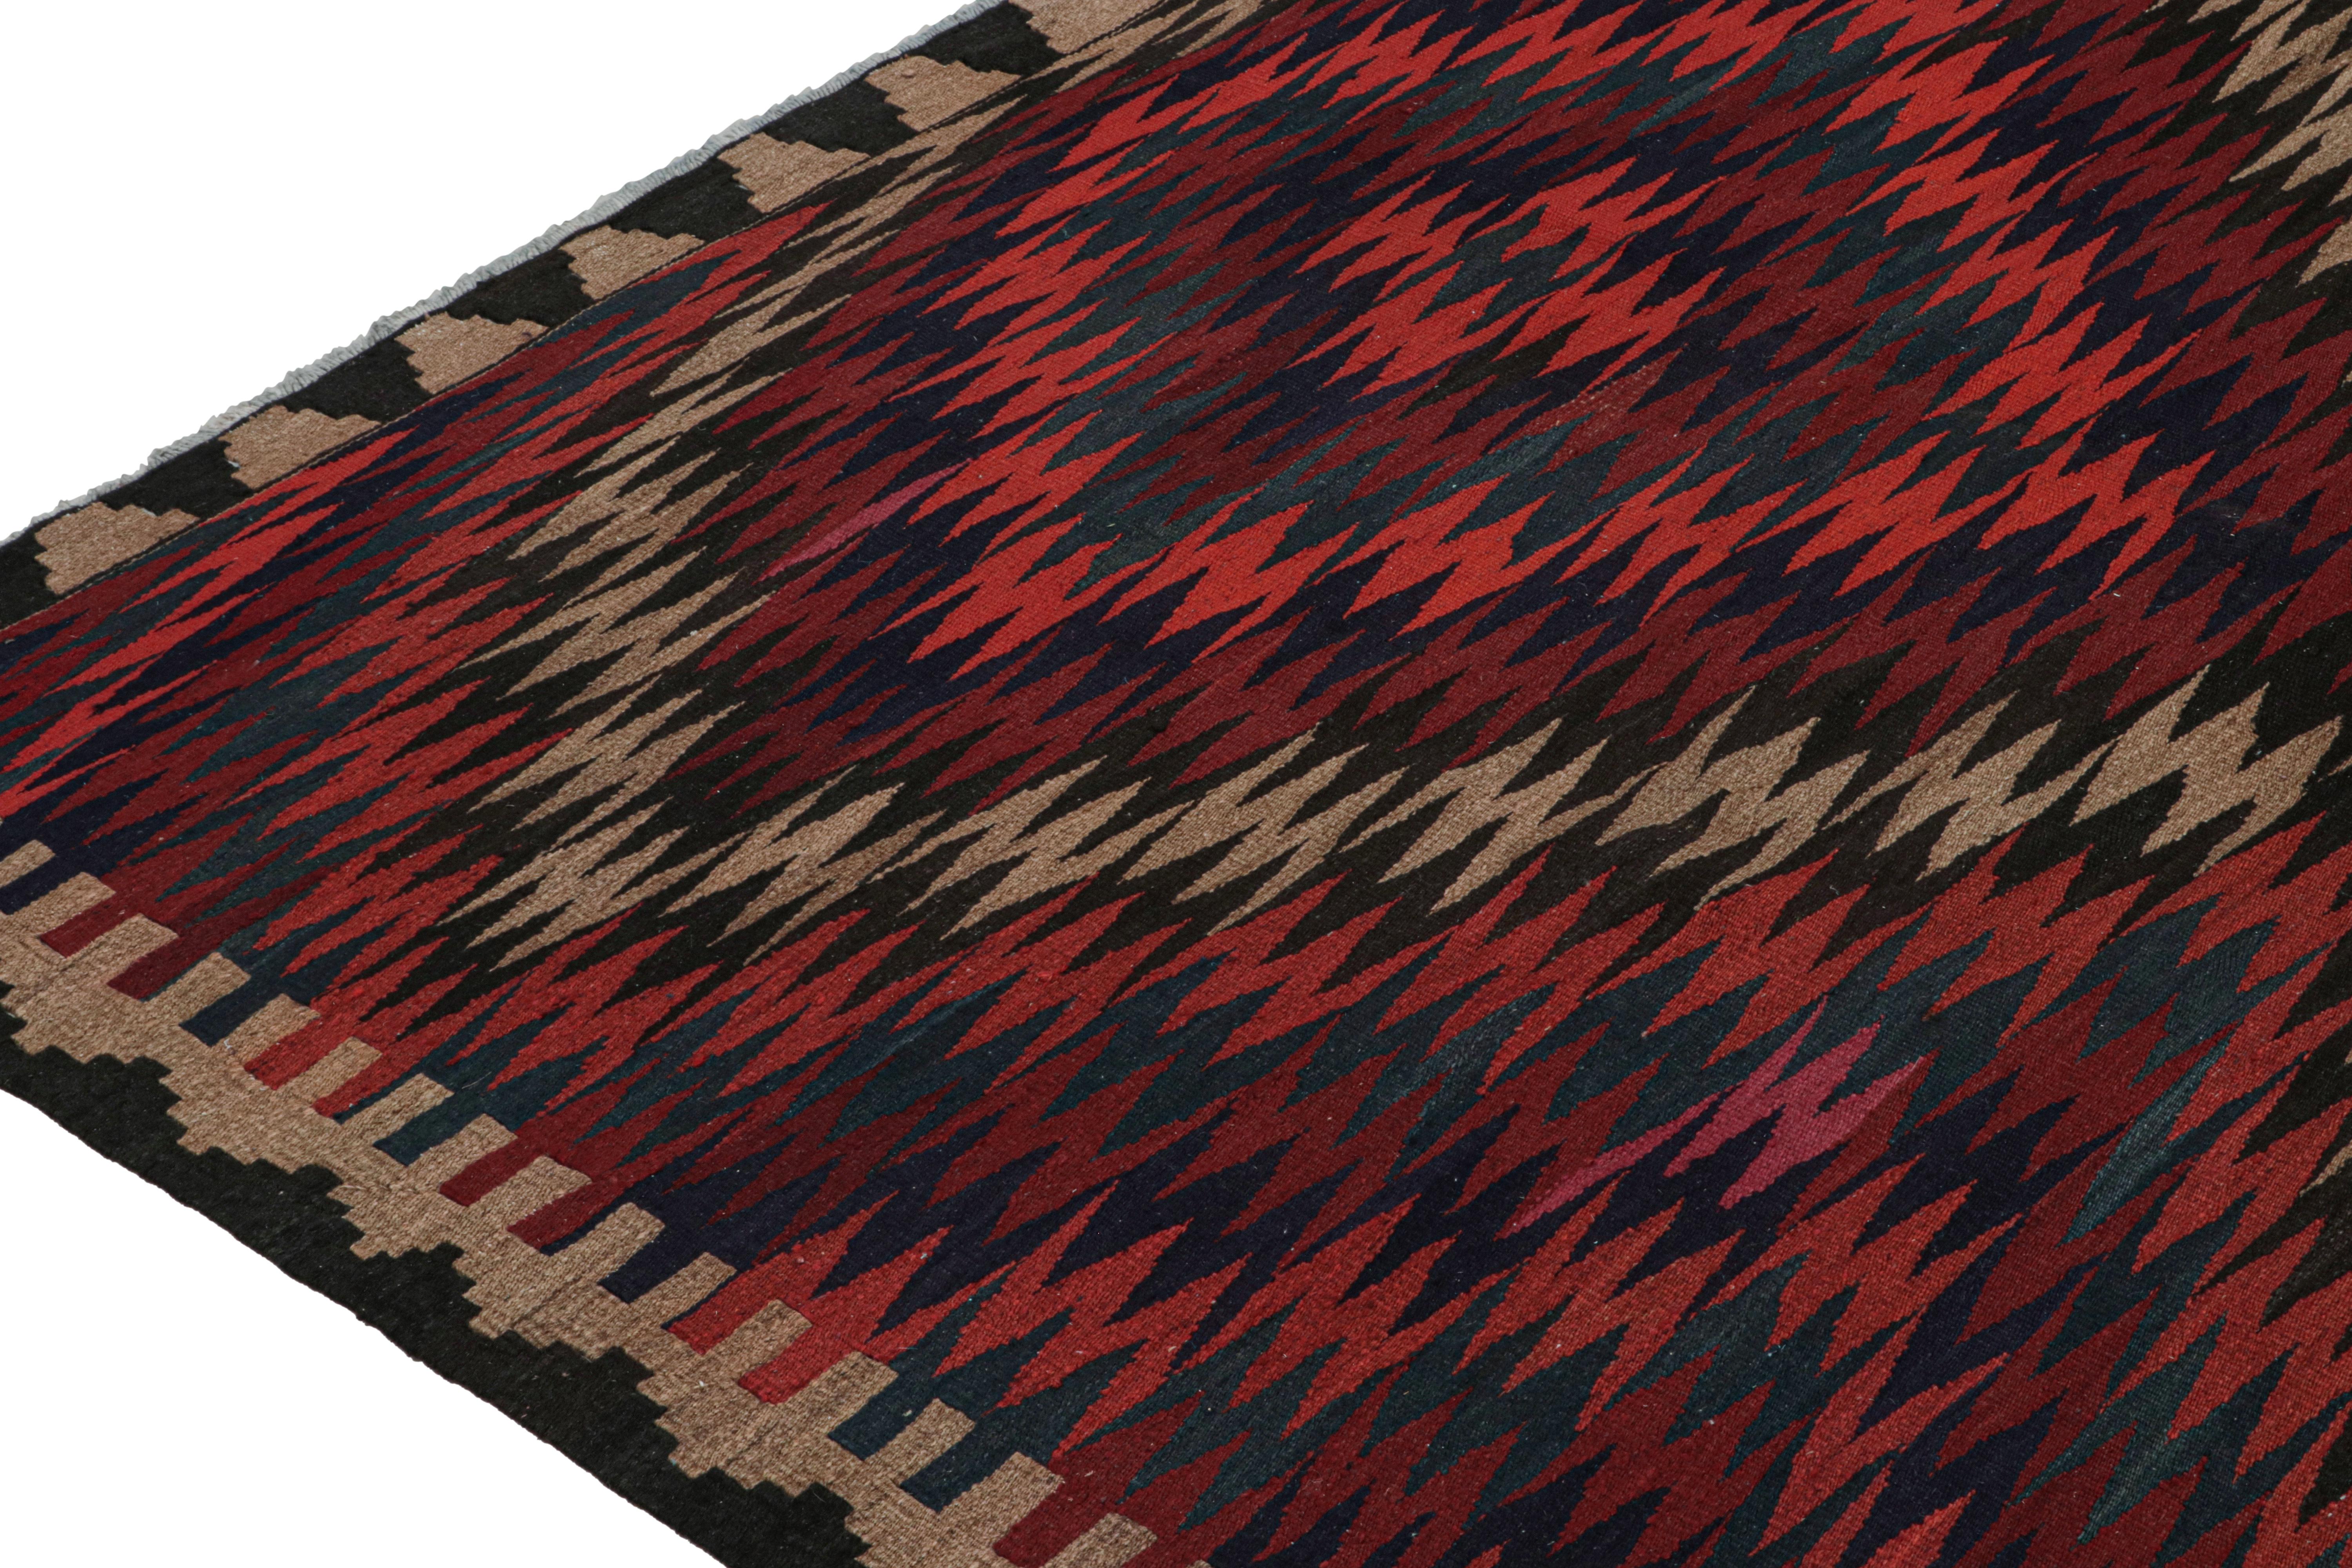 1950s Vintage Bidjar Persian Kilim Runner in Multicolor Patterns by Rug & Kilim In Good Condition For Sale In Long Island City, NY